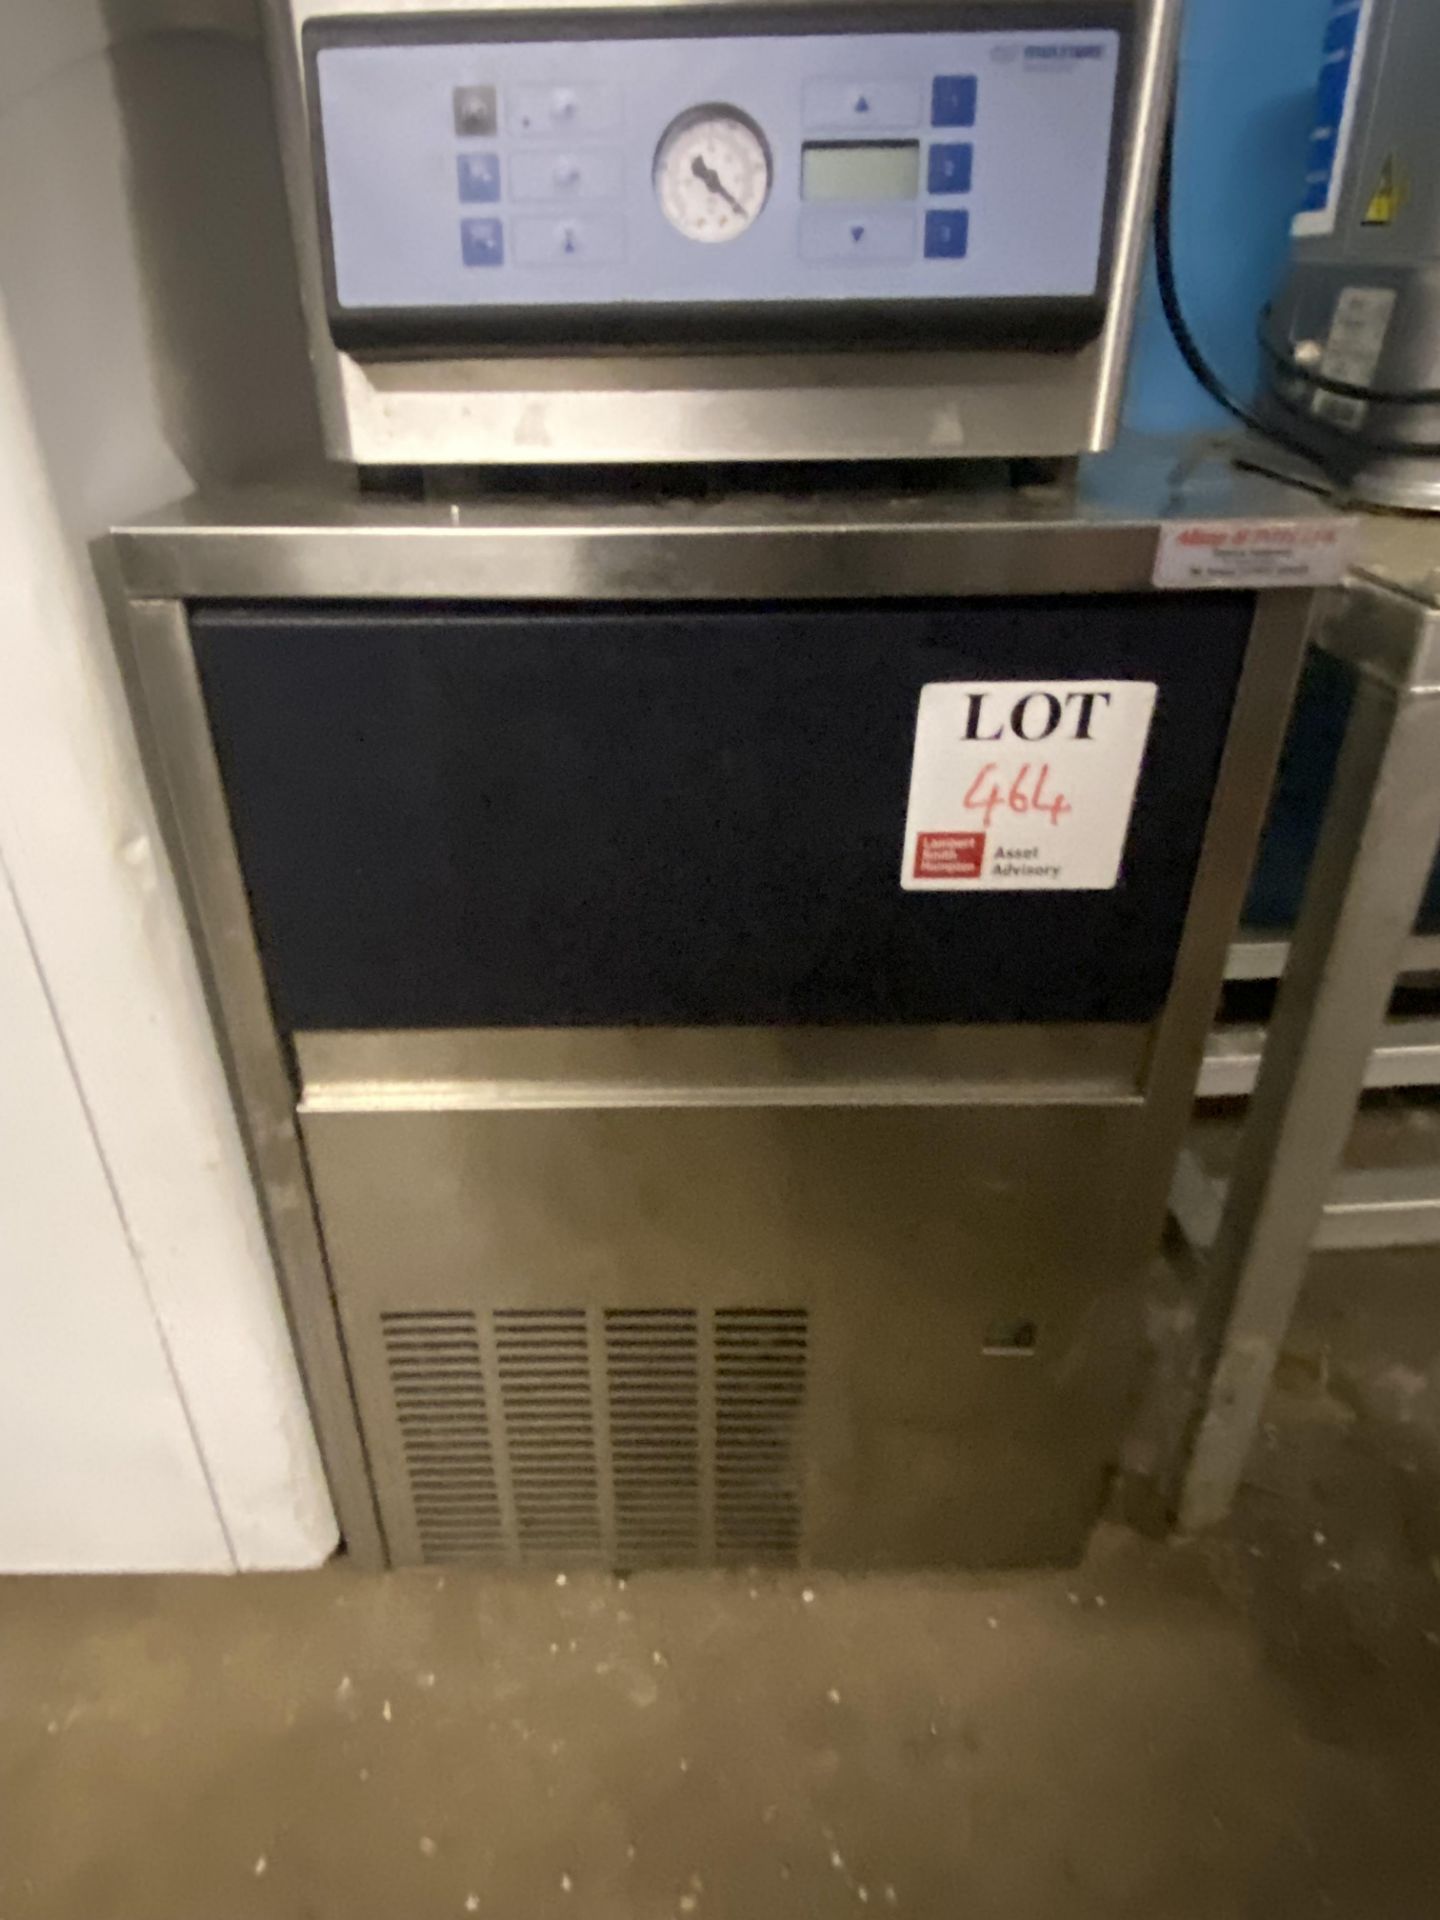 Unbranded stainless steel ice maker